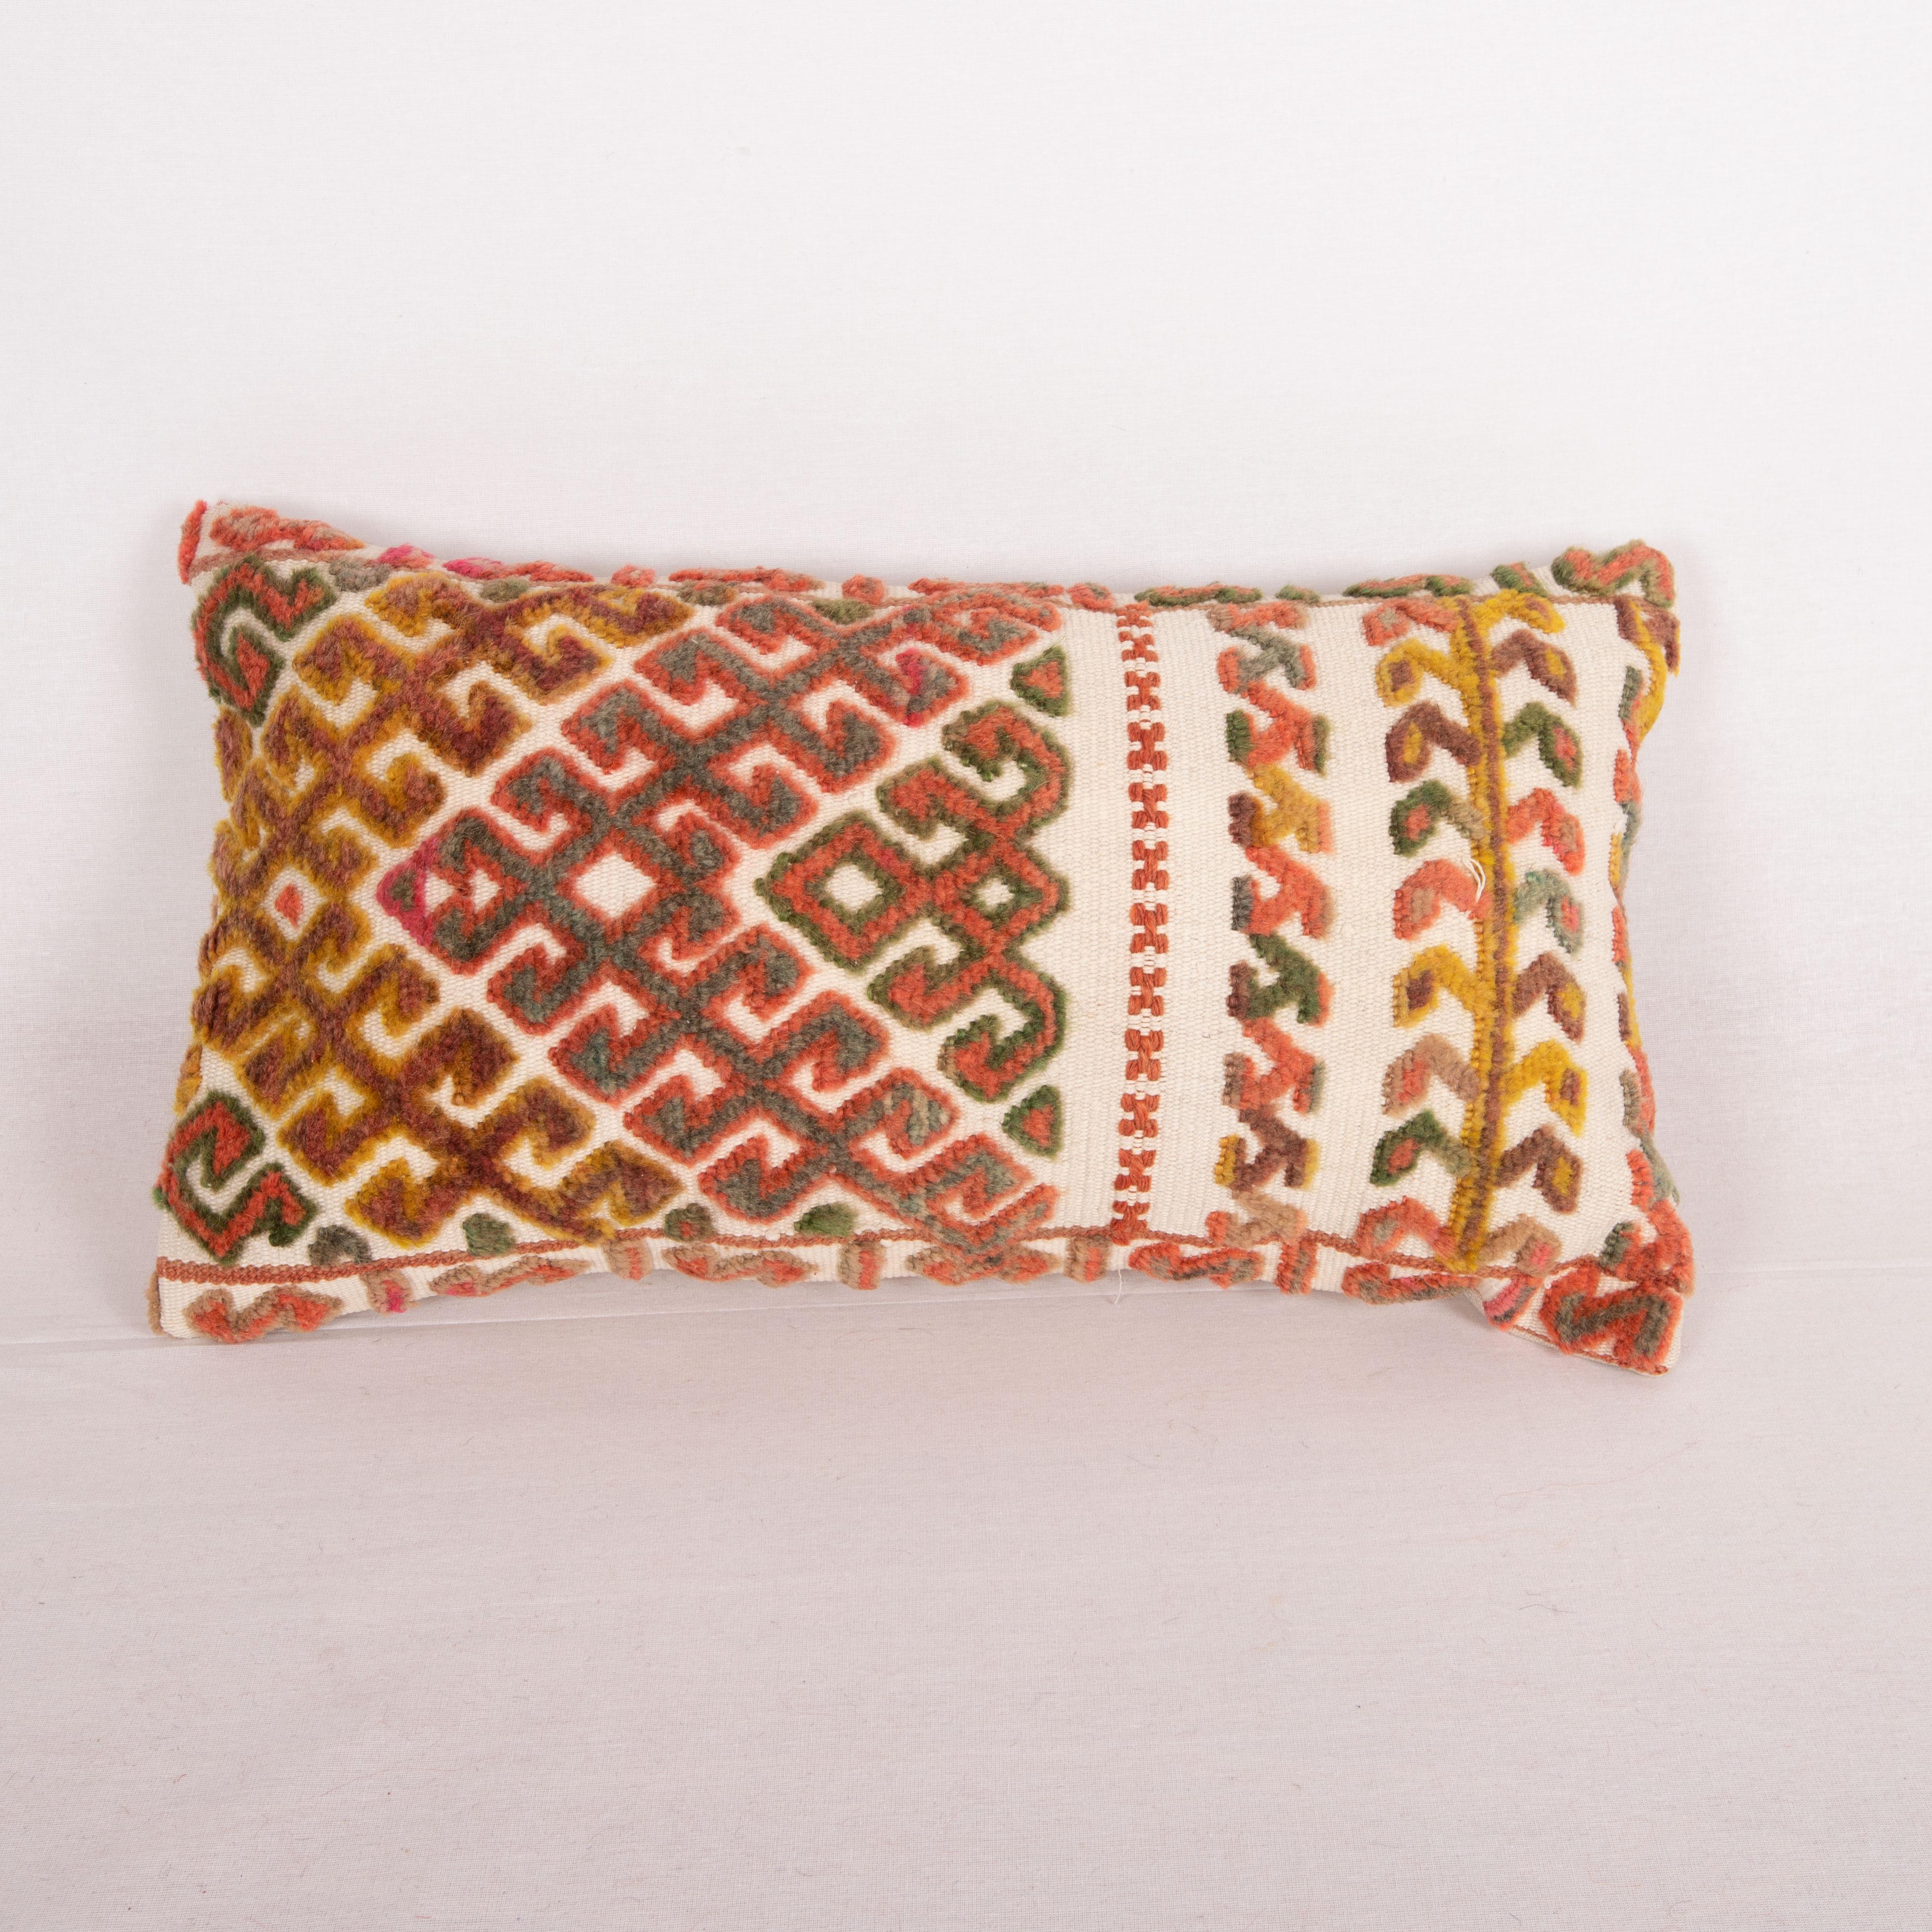 Tent bands are done almost by all the tribes of Turkmen peoples of Central Asia. They functioned as decorative hangings around their dwelling called Yurt. This very pillow is made from a Karakalpak one. 
It does not come with an insert but a bag